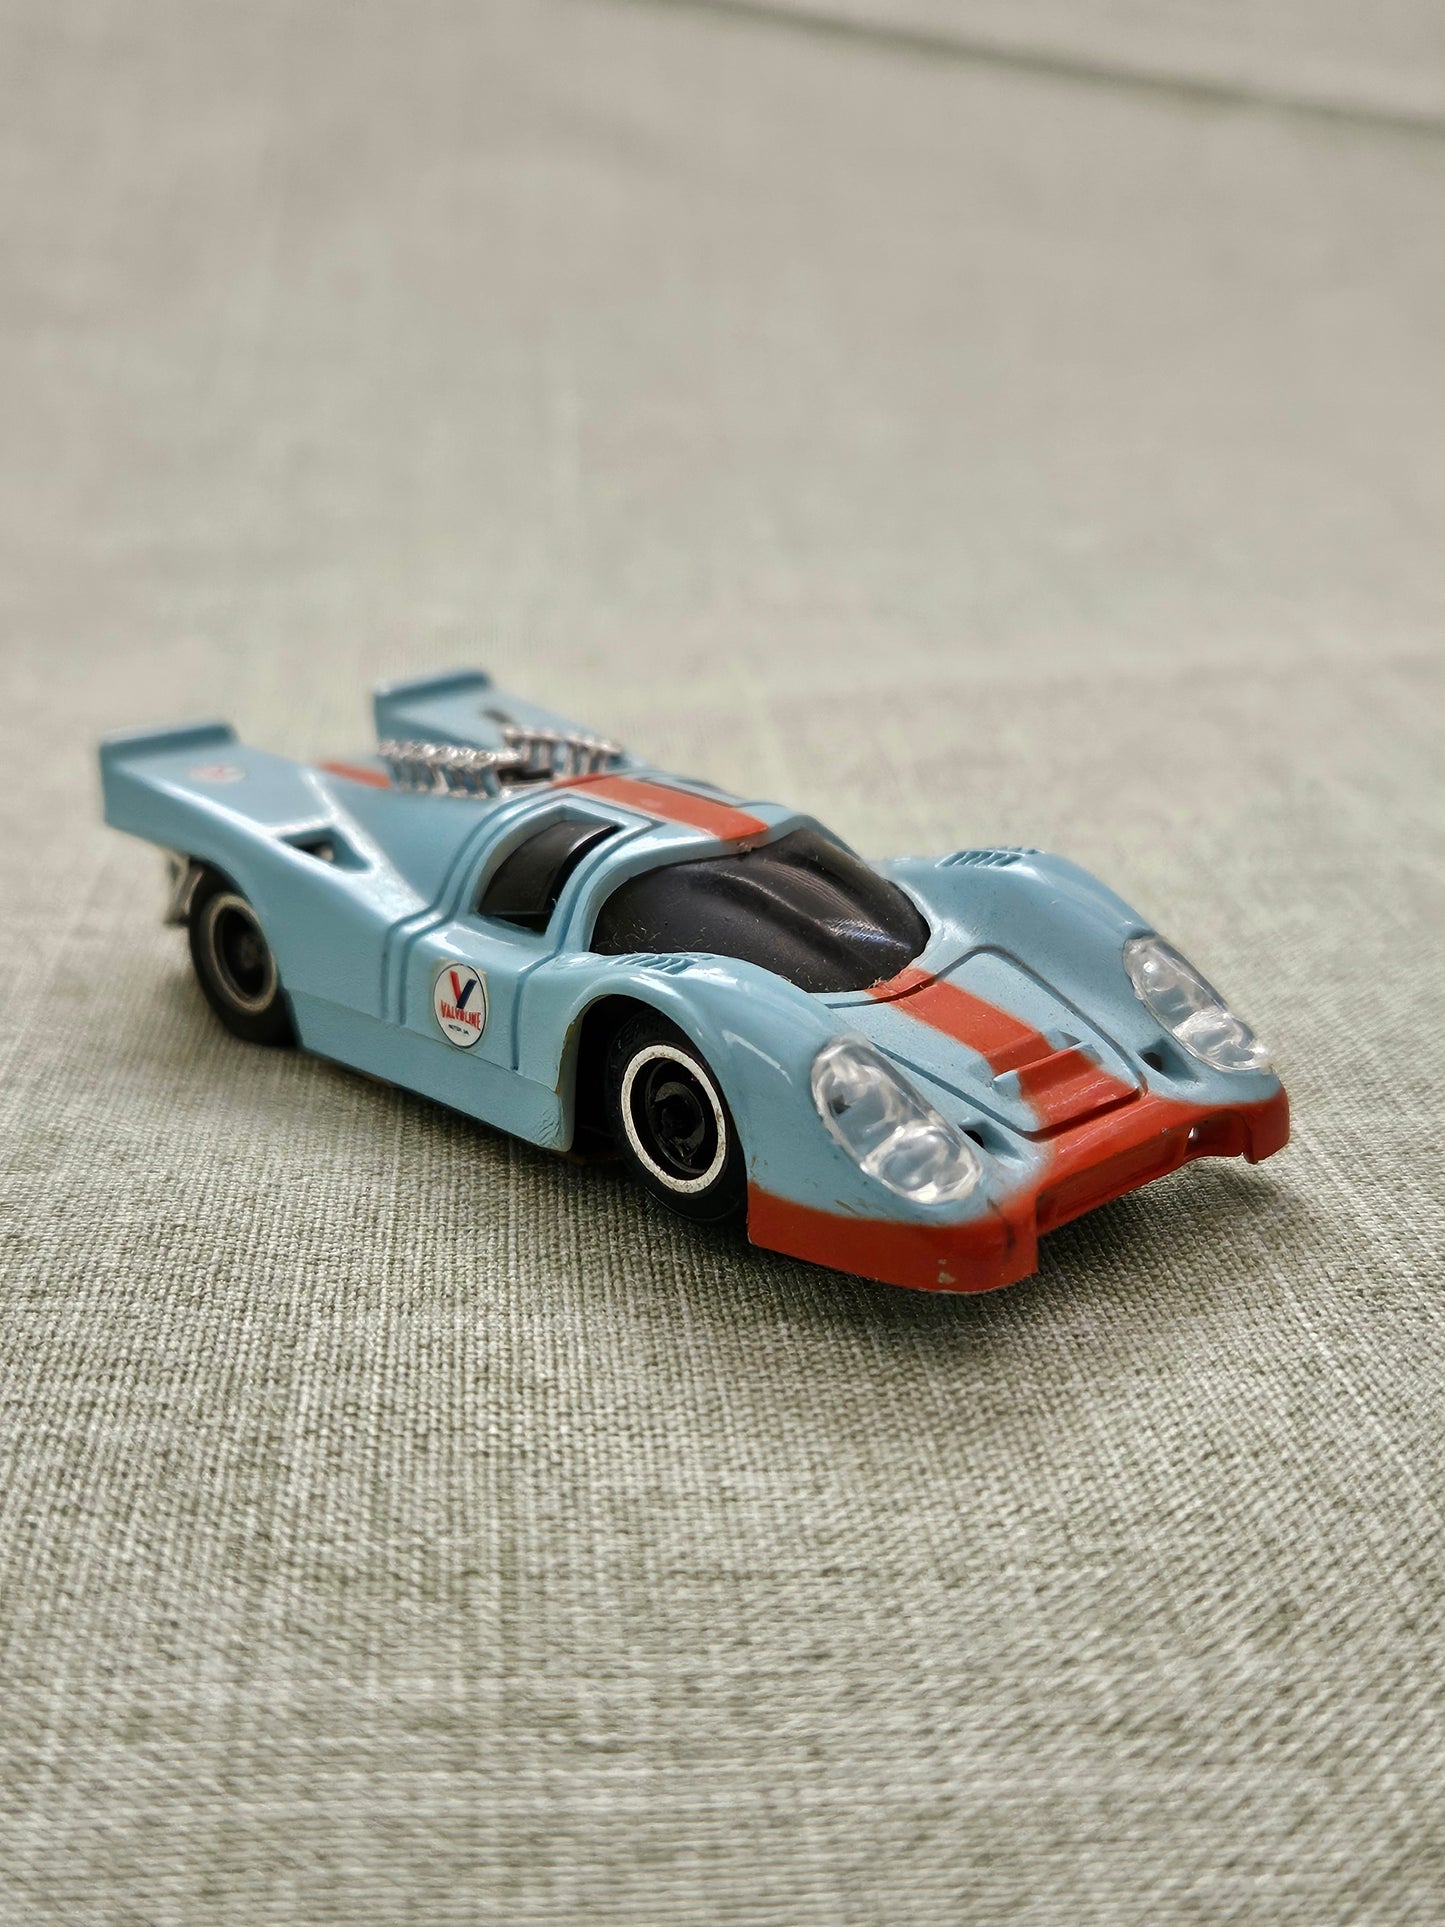 Tyco Pro Electric Racing Slot Car Vintage with Cube Porsche 917 8810 USED Brass